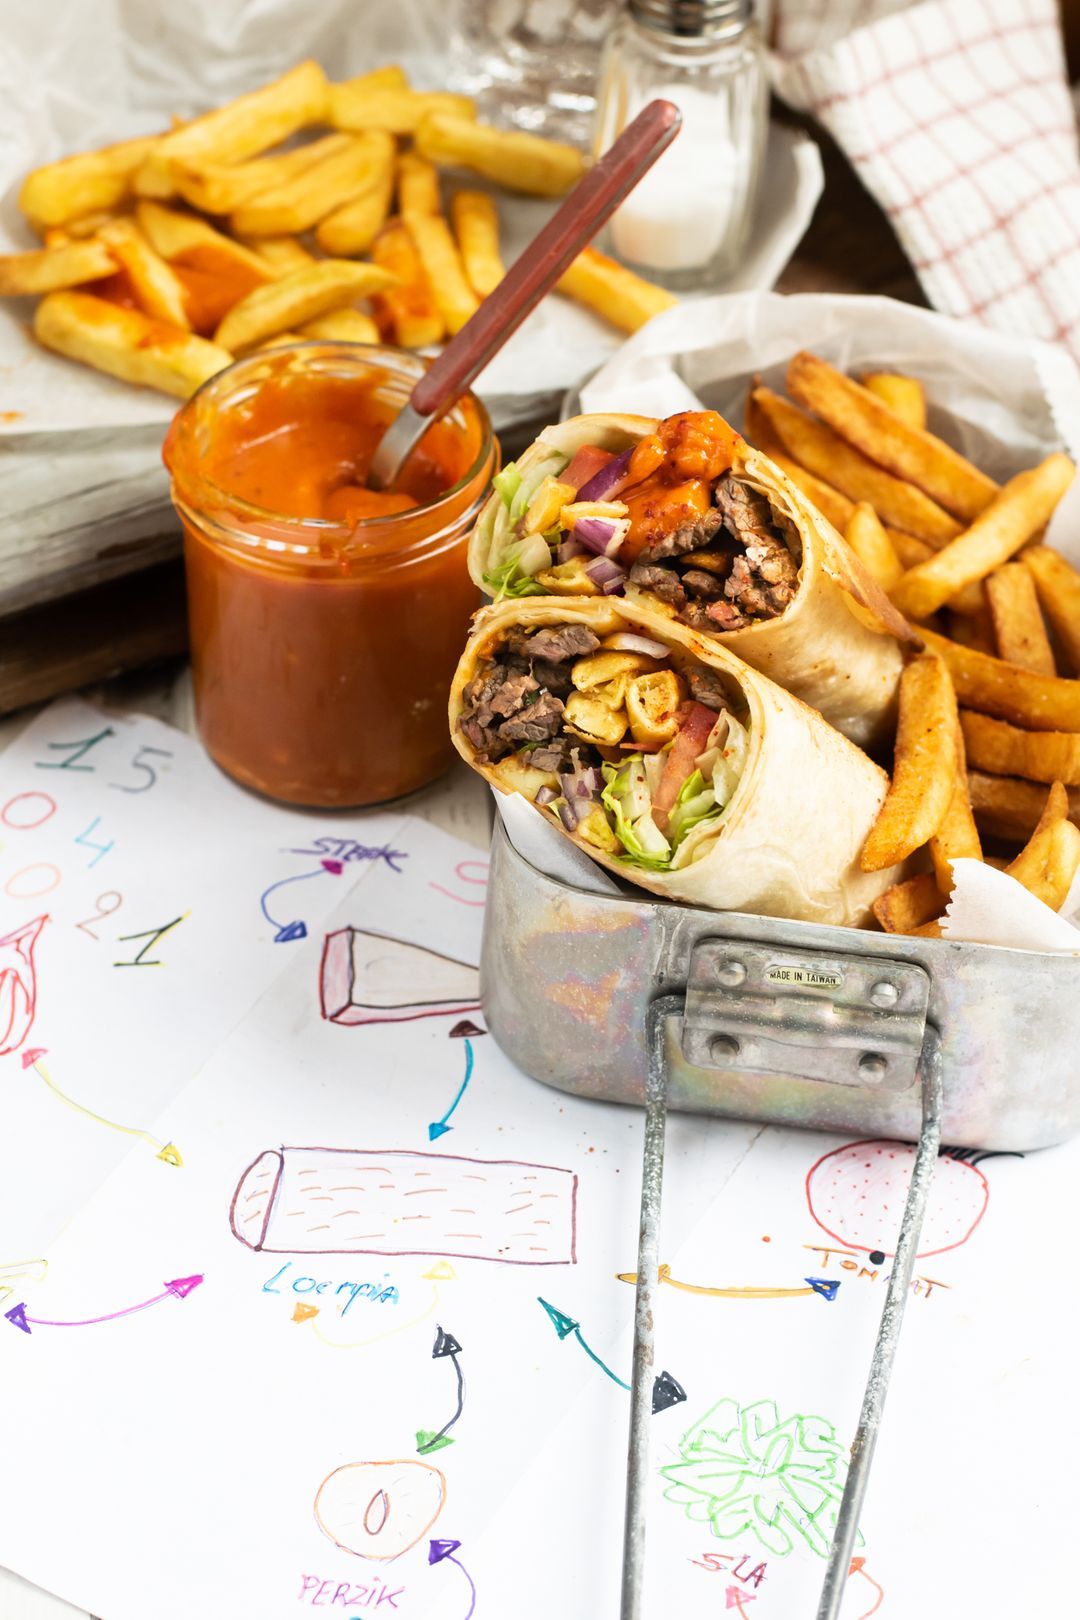 Burrito with steak, fries and peach ketchup